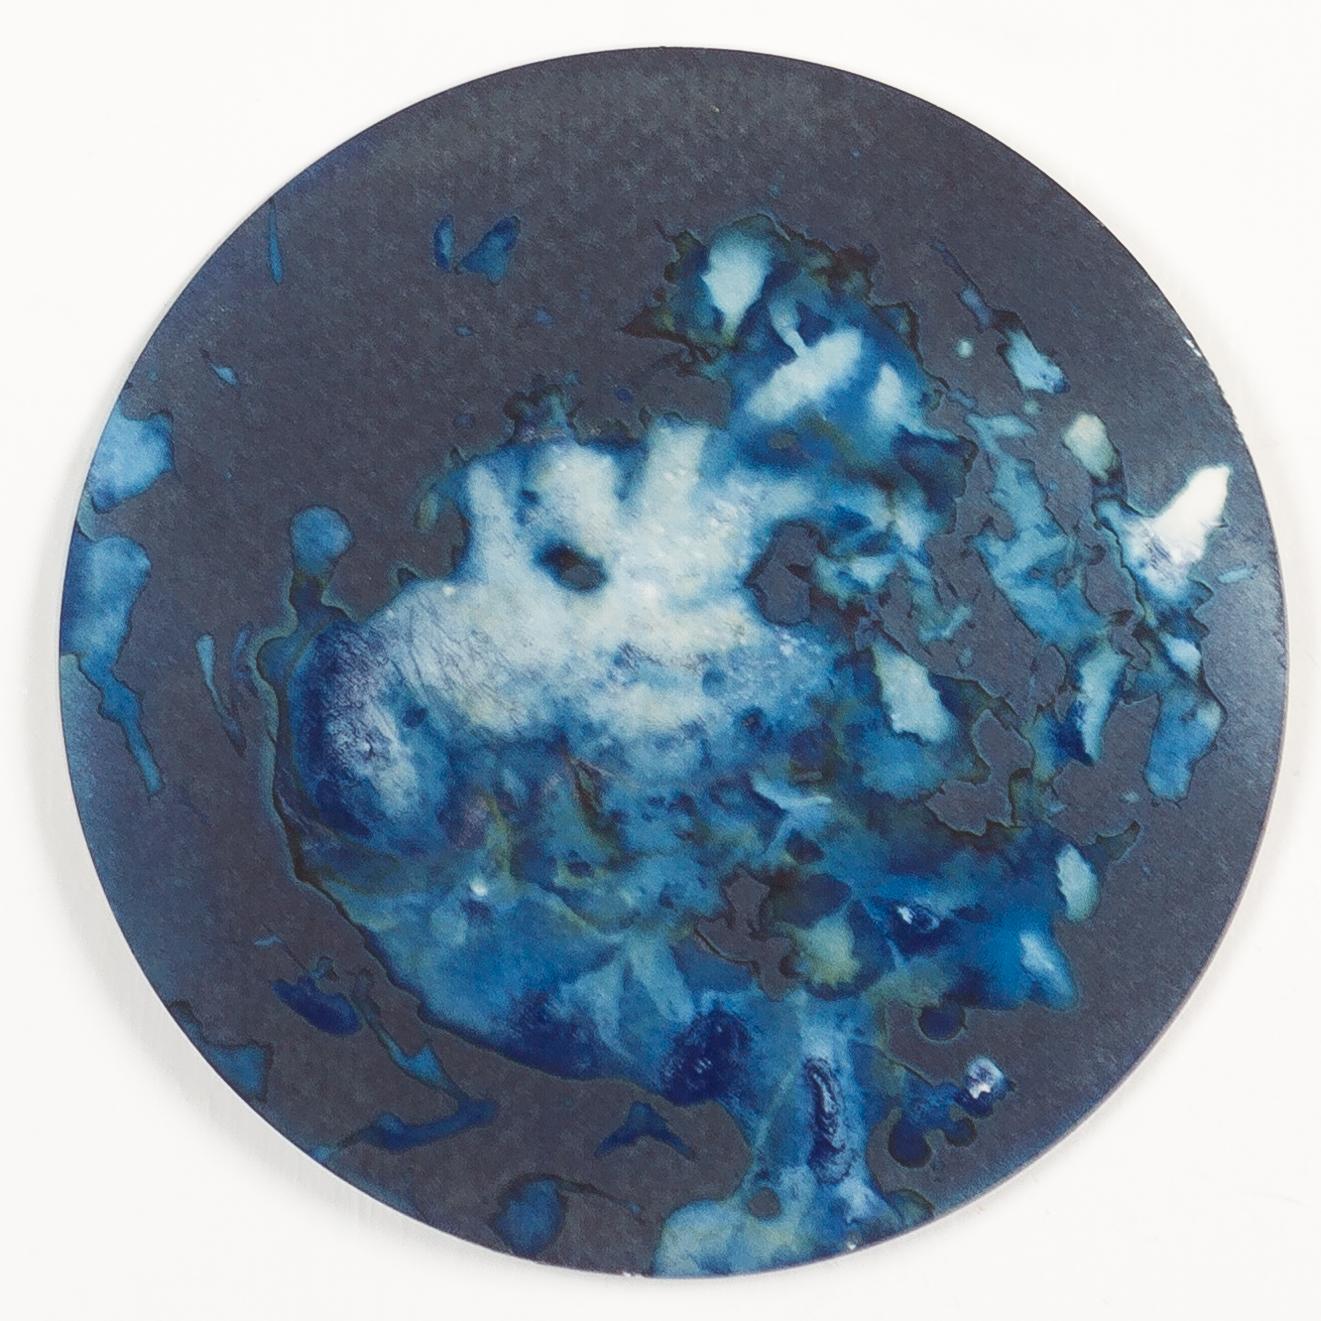 Algas 23, 63 y 64. Cyanotype photograhs mounted in high resistance glass dish - Abstract Sculpture by Paola Davila